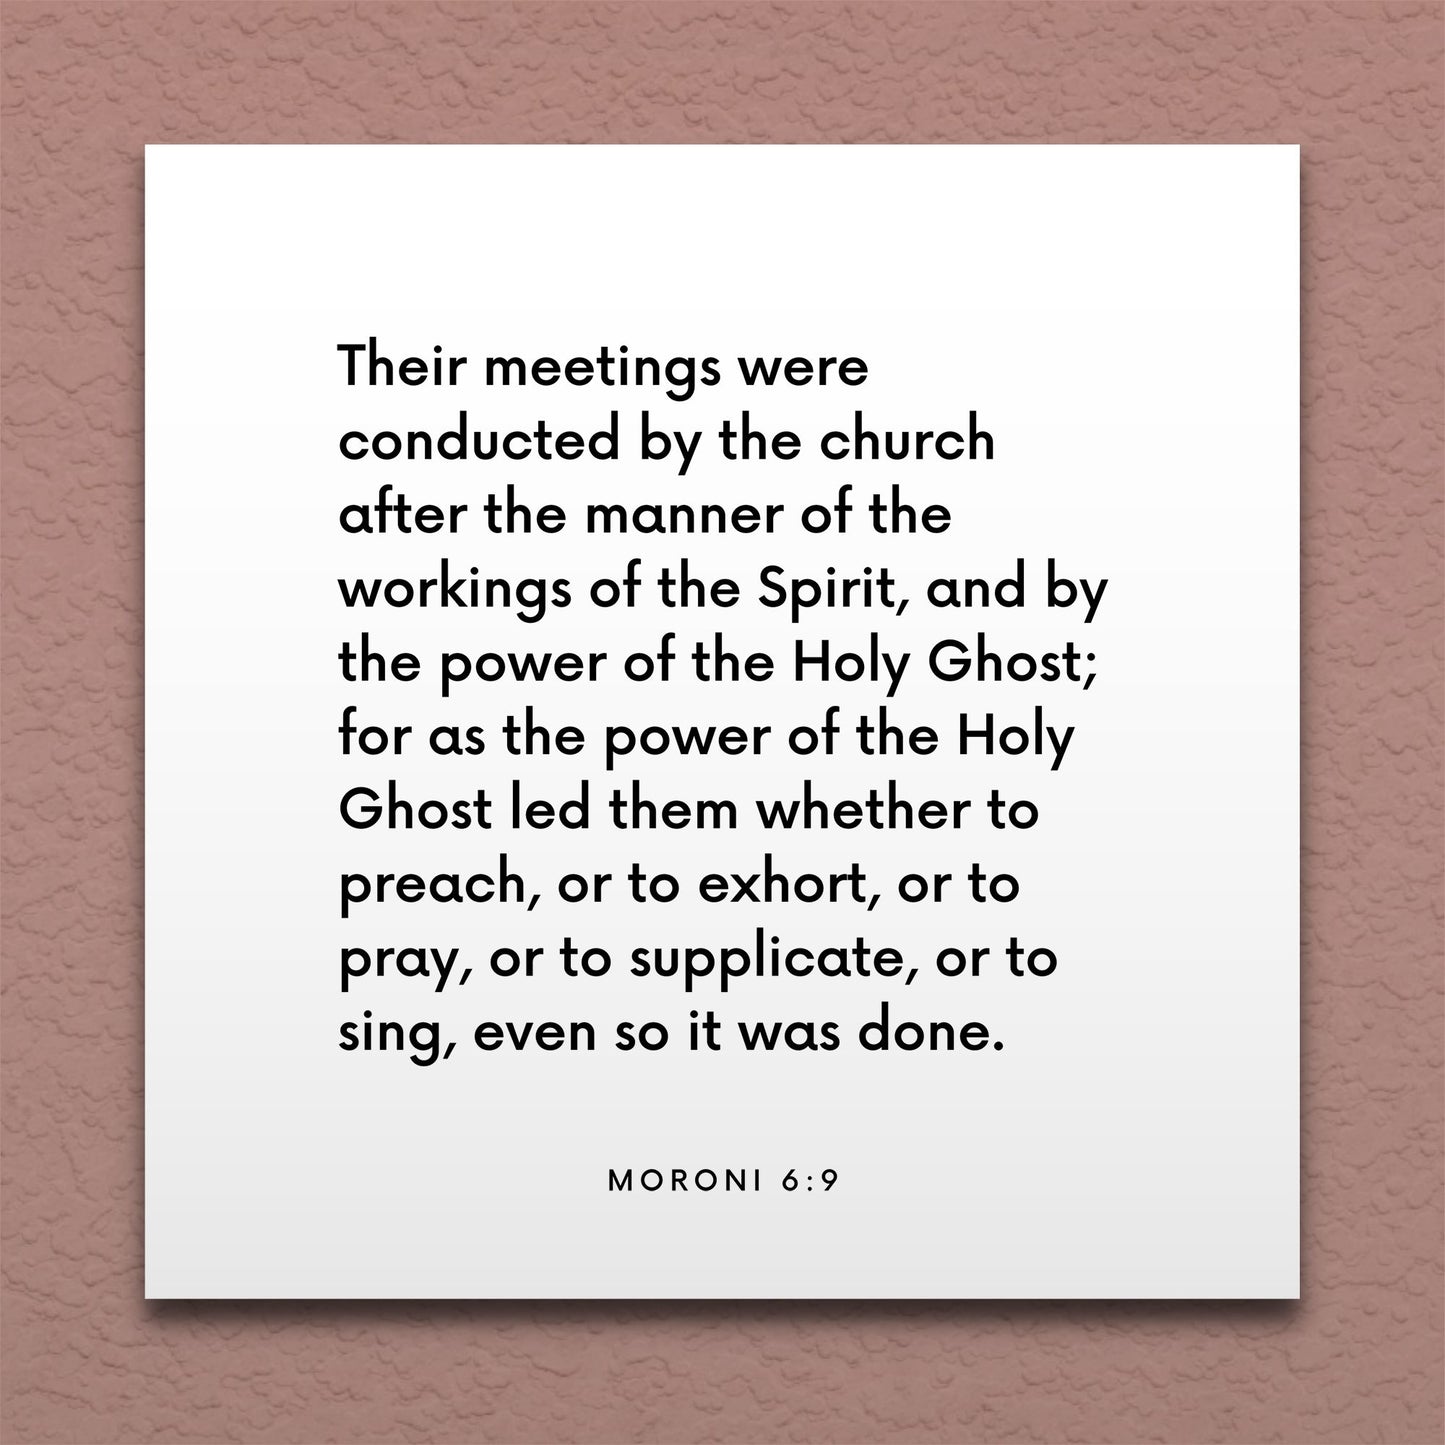 Wall-mounted scripture tile for Moroni 6:9 - "Their meetings were conducted by the Spirit"